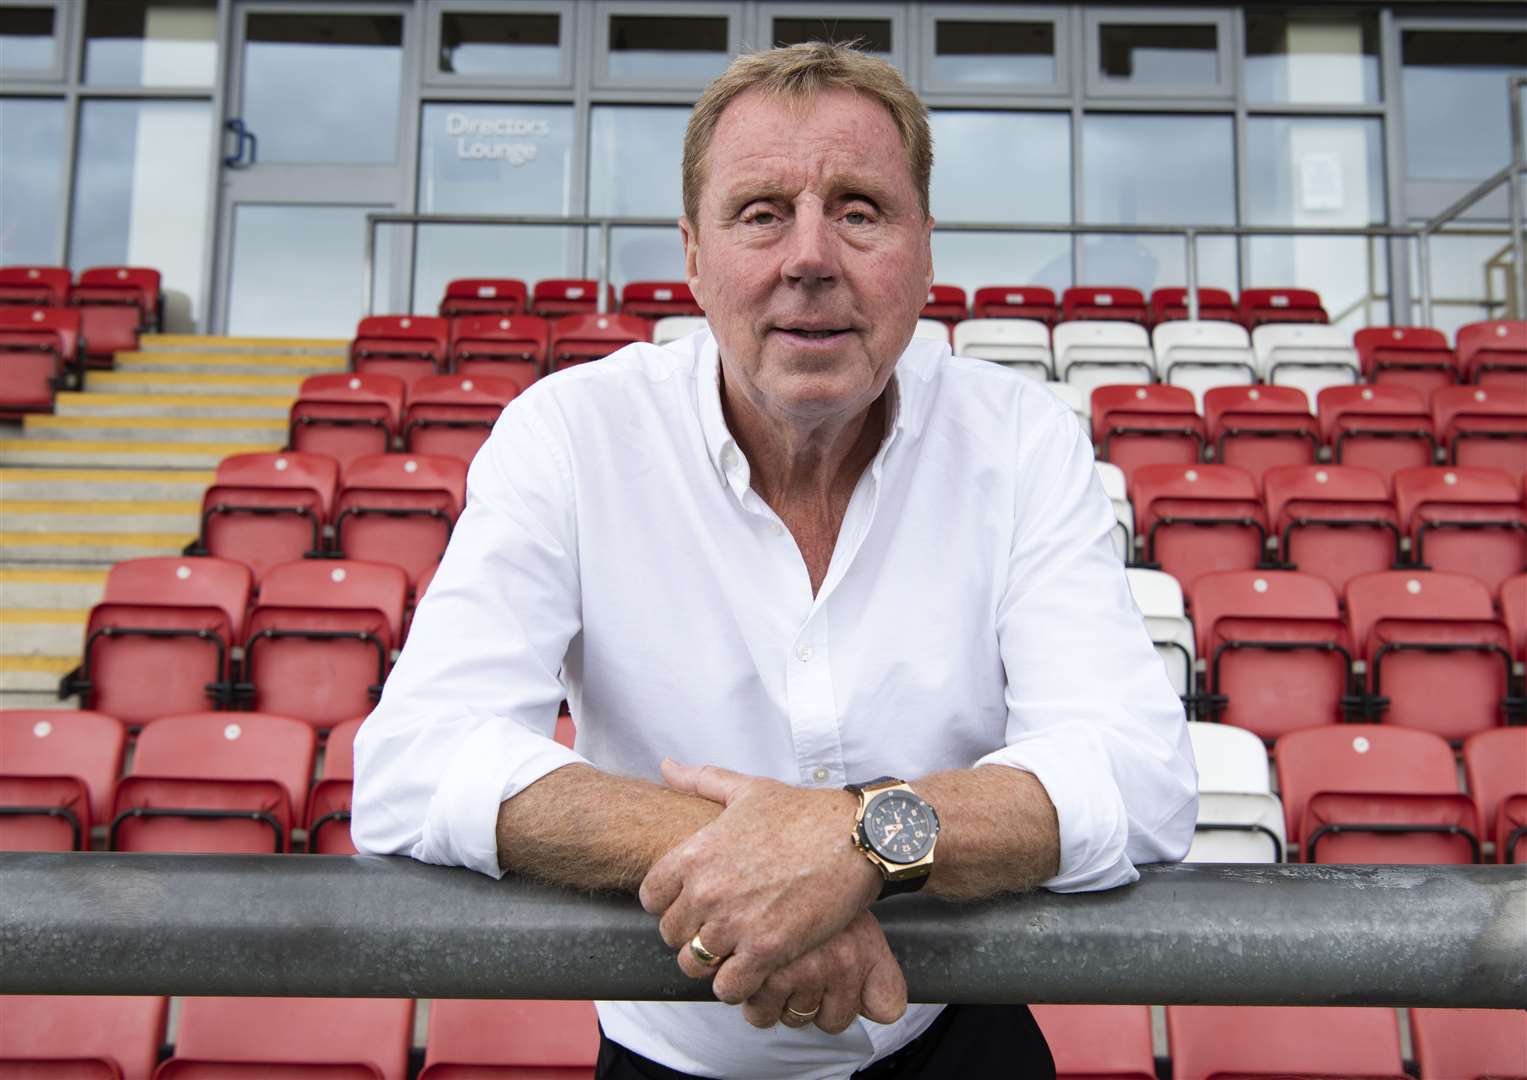 Harry Redknapp will assemble a team of ageing England footballing legends and get them into shape. Copyright ITV.